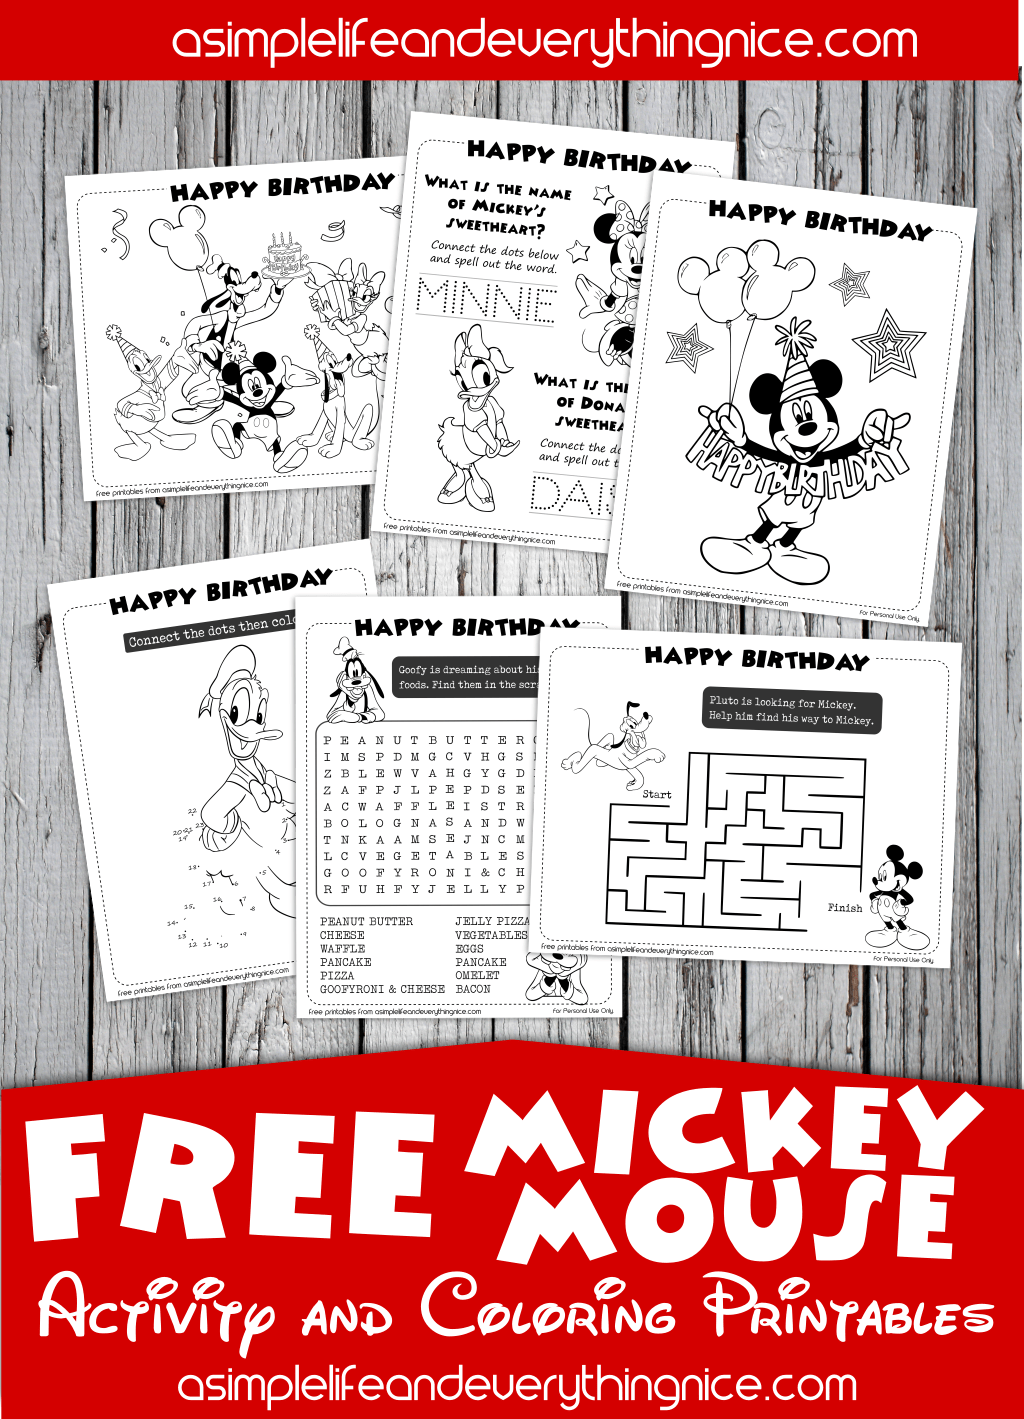 Free mickey mouse clubhouse birthday activity and coloring printables